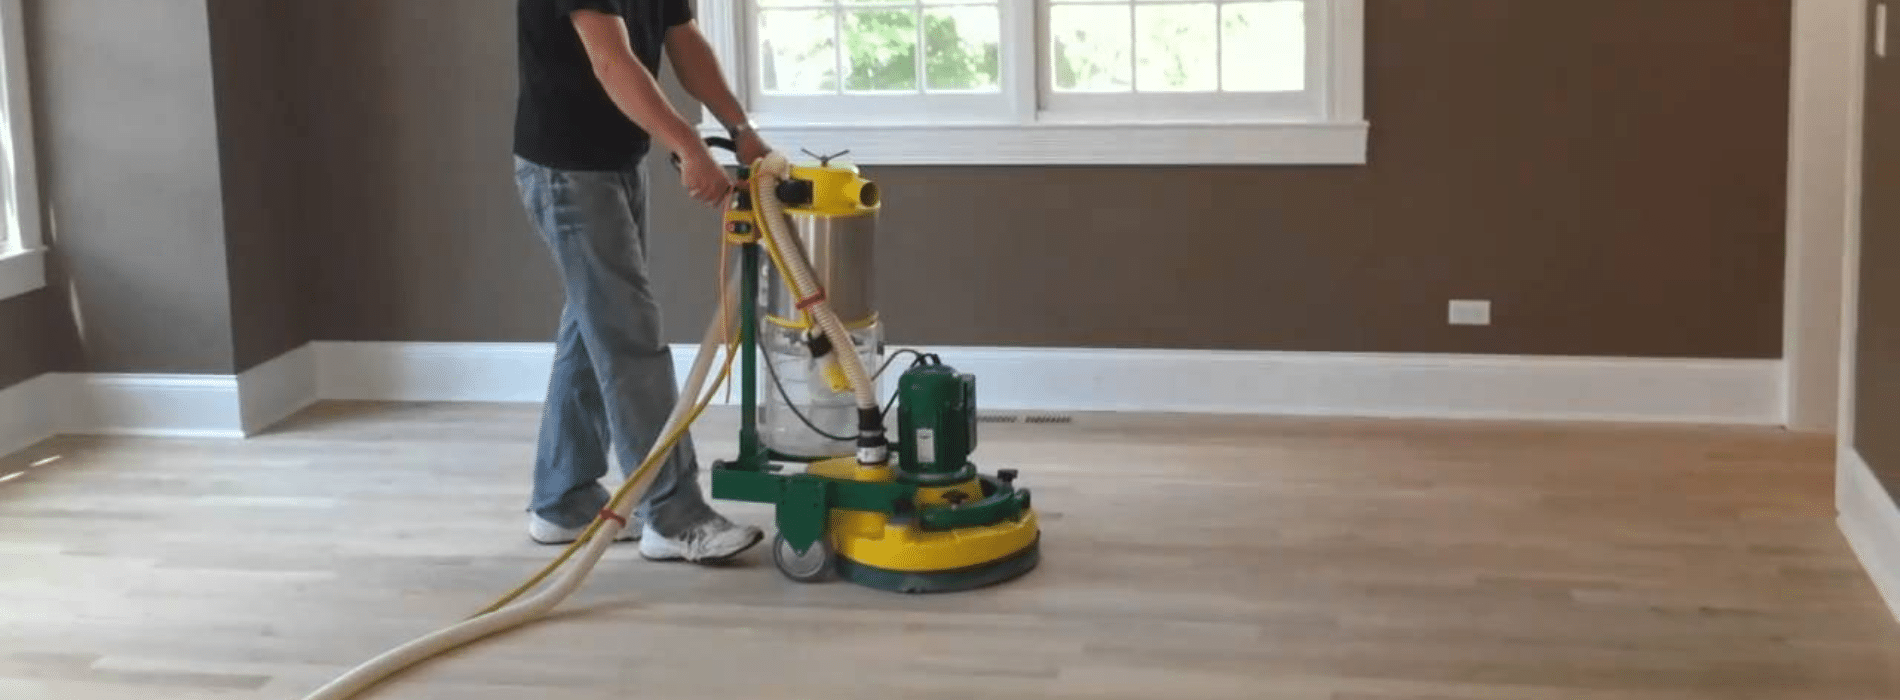 Experience expert herringbone floor sanding by Mr Sander® using the Effect 2200 belt sander. Voltage: 220V, Frequency: 60Hz. Witness the clean and efficient results on a 250x650 mm floor with our HEPA-filtered dust extraction system.